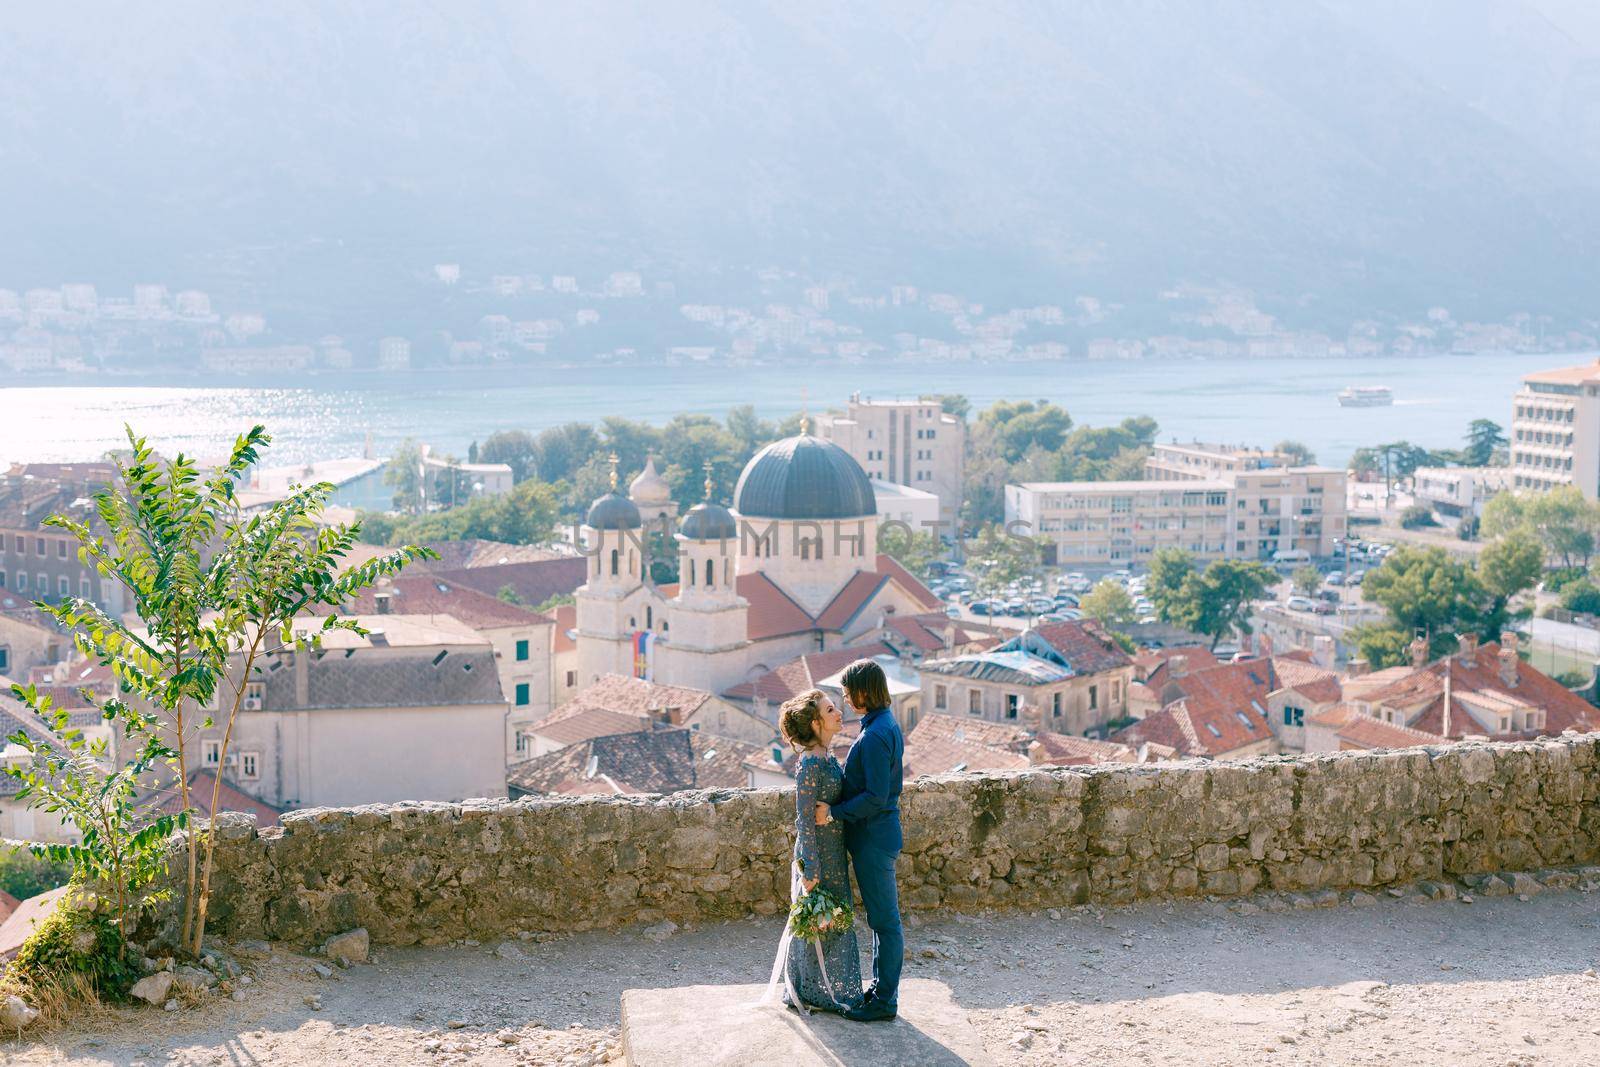 The bride and groom hug on the observation deck with a picturesque view of the old town of Kotor and the Bay of Kotor by Nadtochiy